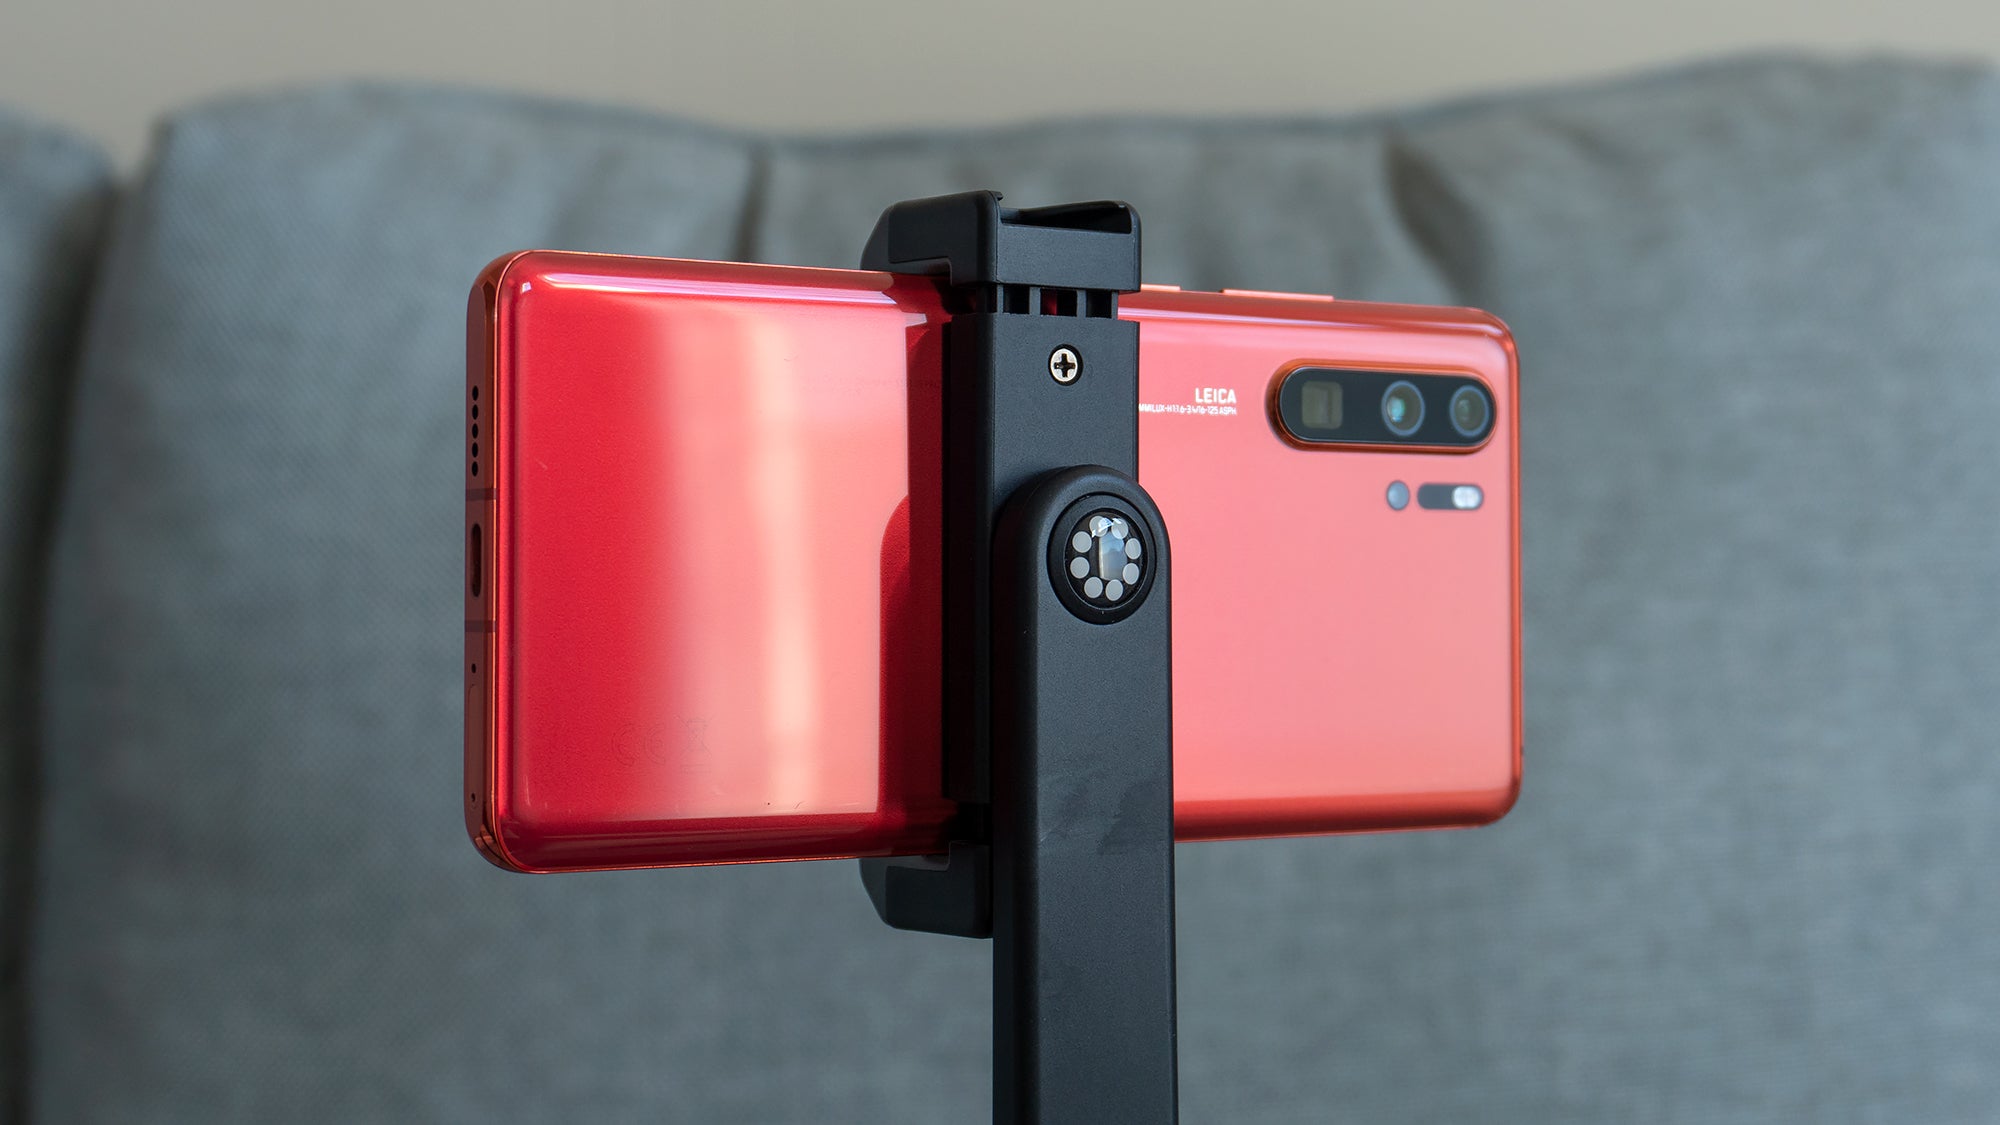 The medium-sized version of the PodZilla includes a surprisingly decent adjustable smartphone mount that holds a device very securely. (Photo: Andrew Liszewski - Gizmodo)